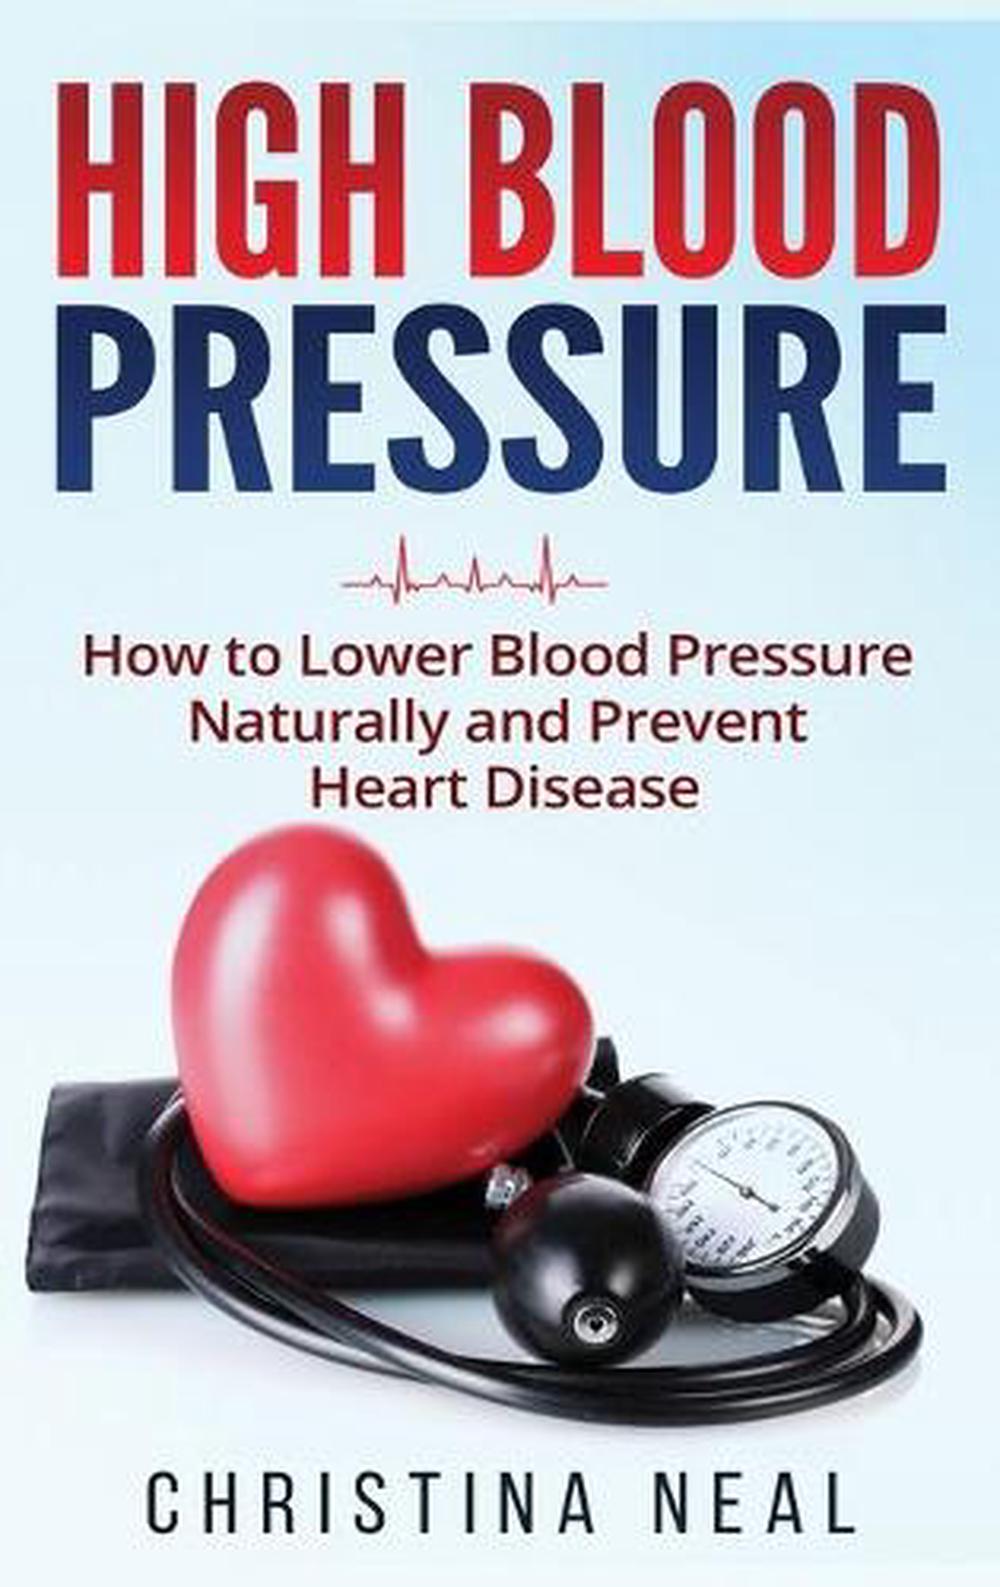 High Blood Pressure How to Lower Blood Pressure Naturally